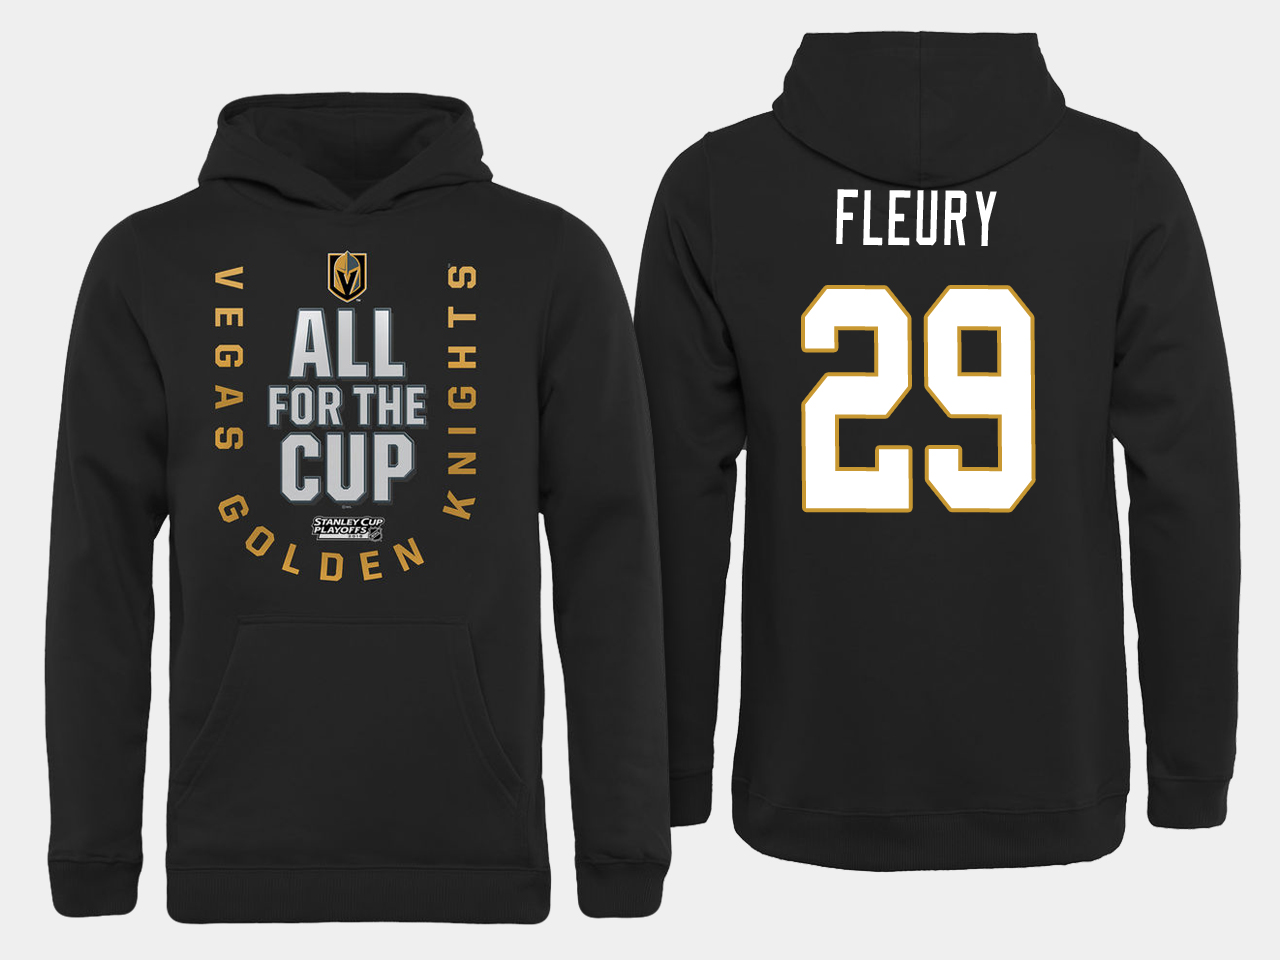 Men NHL Vegas Golden Knights #29 Fleury All for the Cup hoodie->more nhl jerseys->NHL Jersey